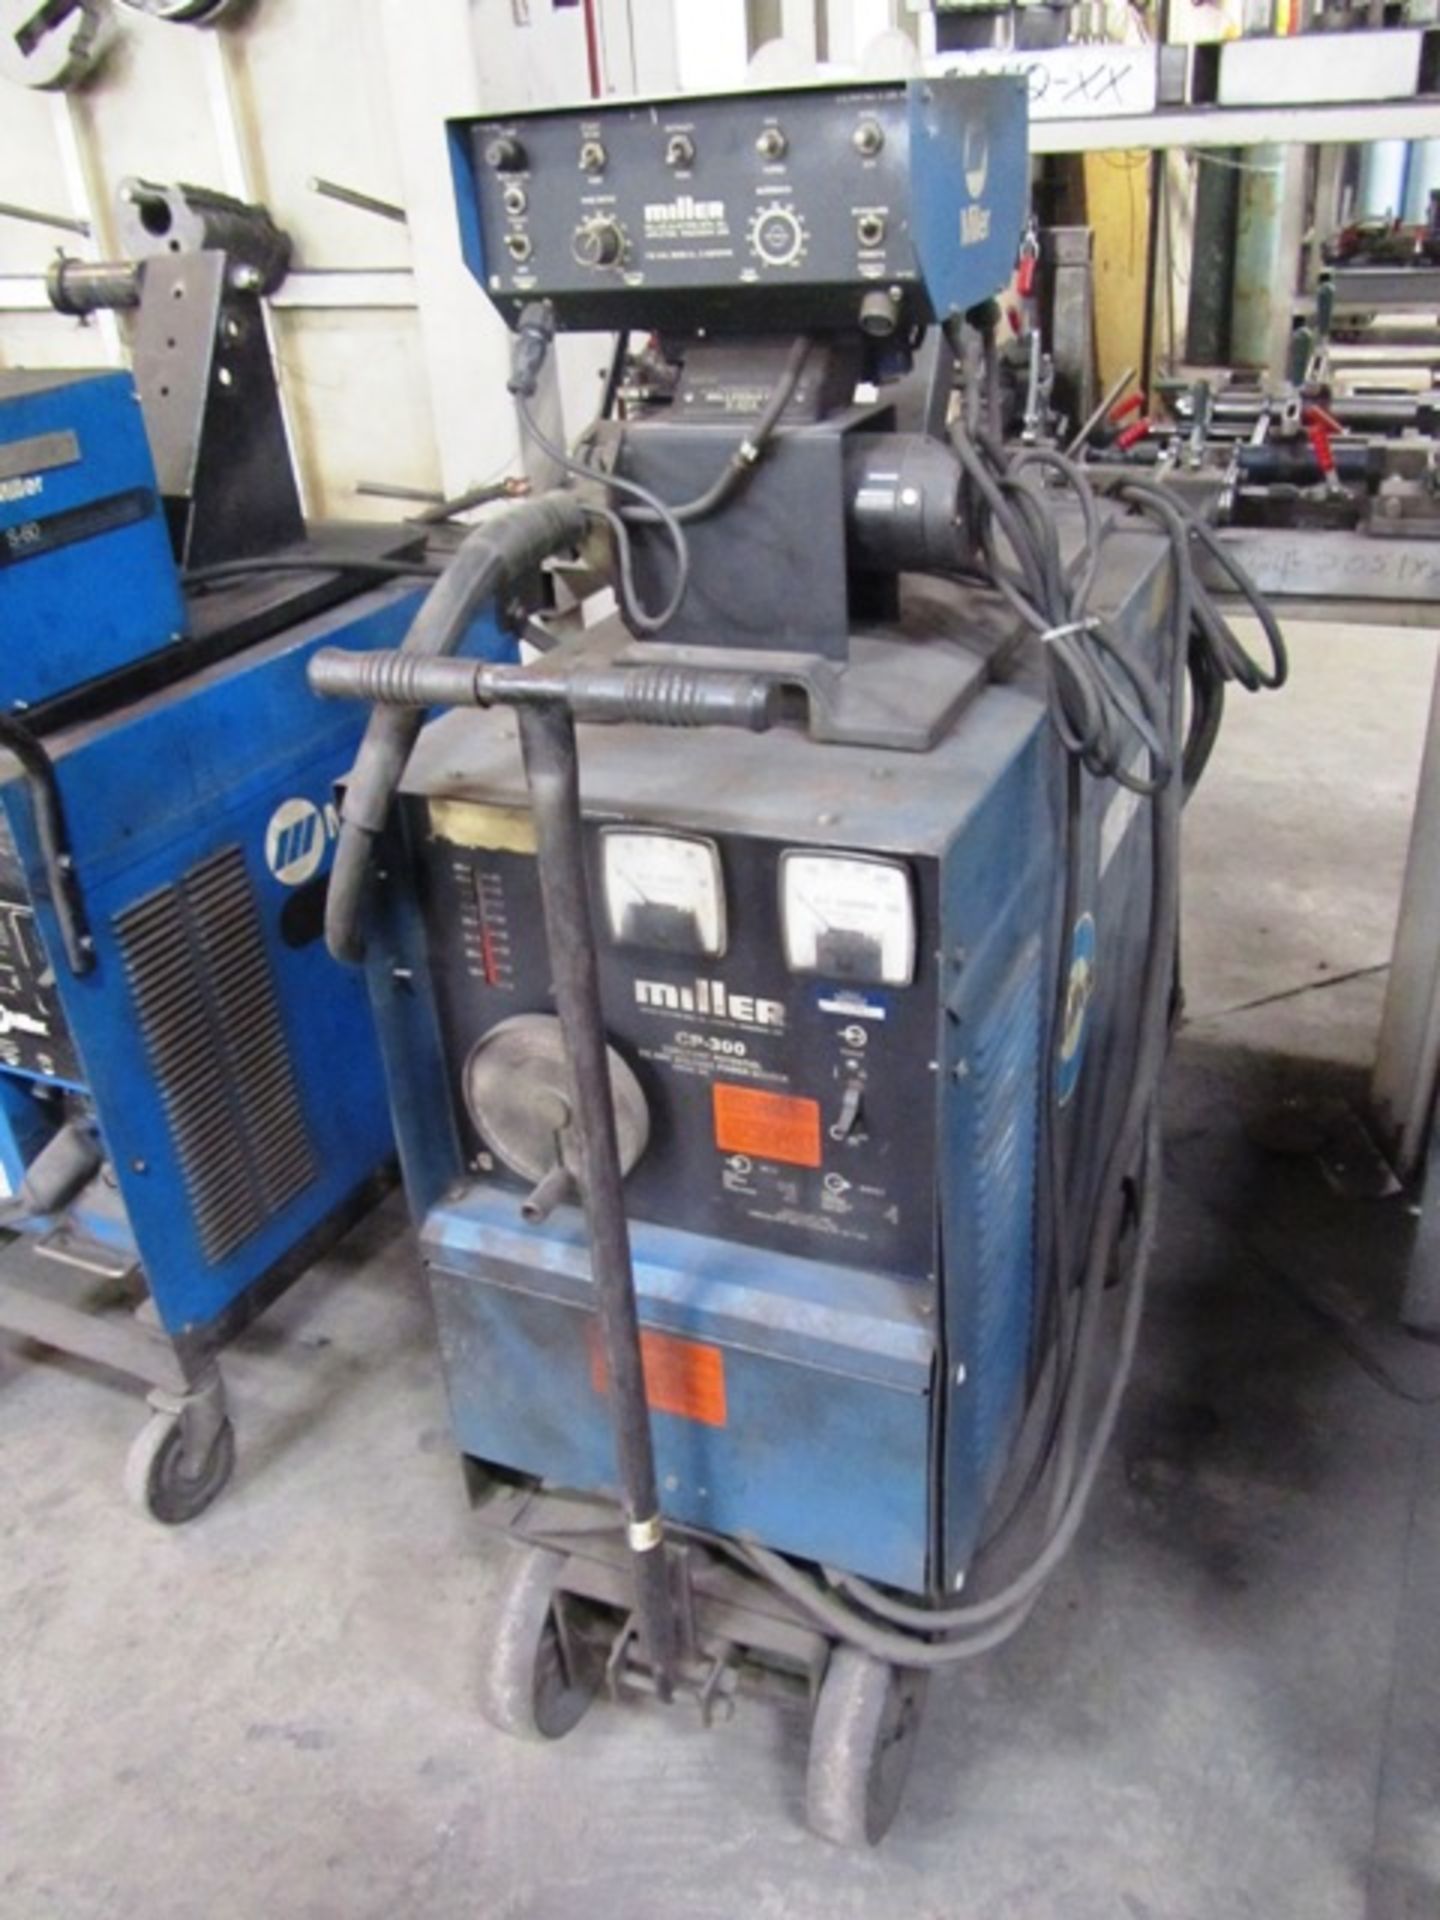 Miller CP-300 Portable Mig Welder with Millermatic S-52A Wire Feeder (may need repair)